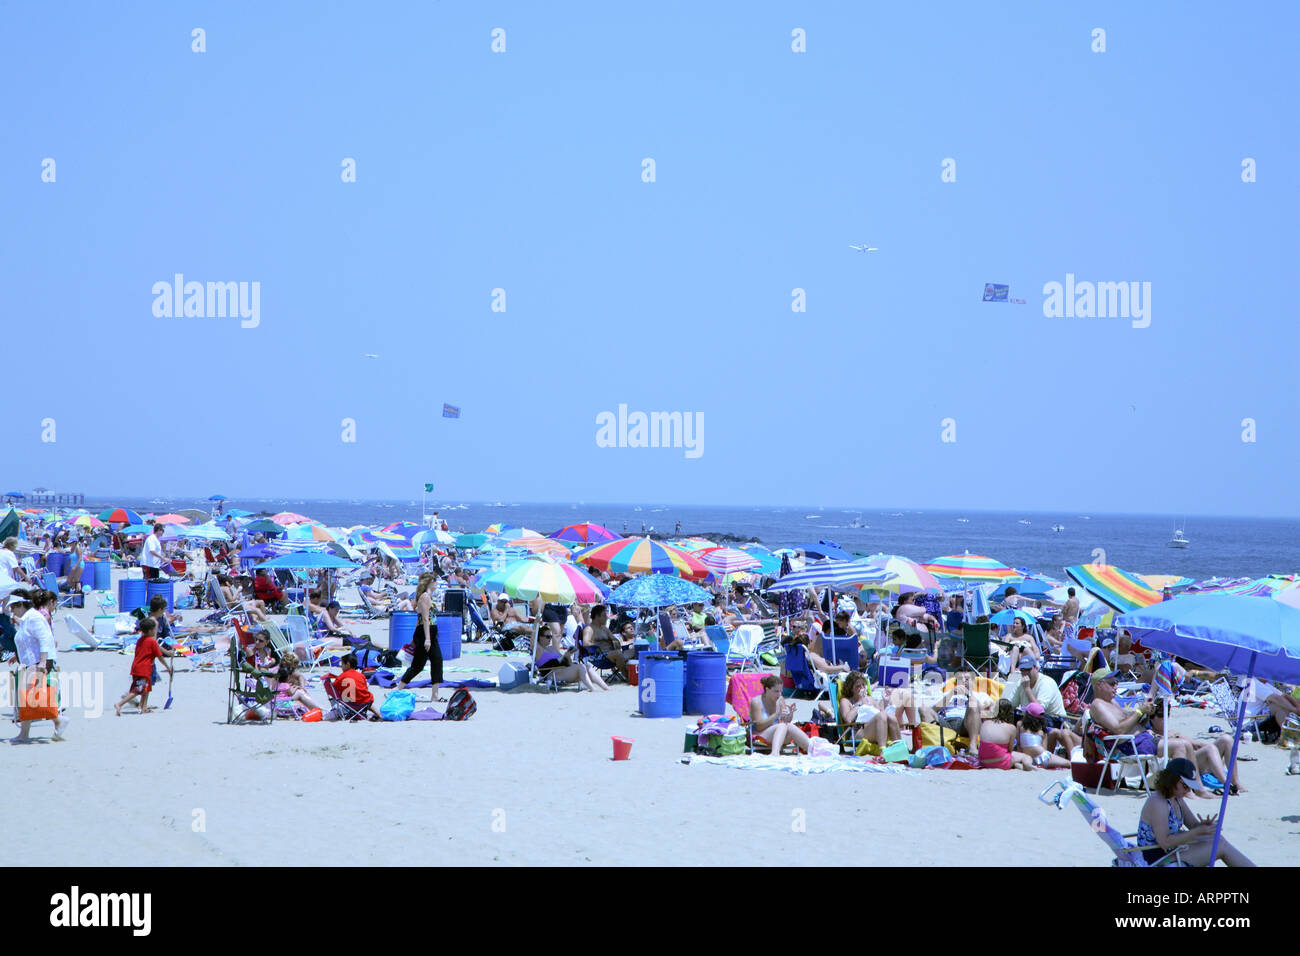 Mass of people with colorful beach umbrellas, chairs and towels on sandy beach at jersey shore. Stock Photo